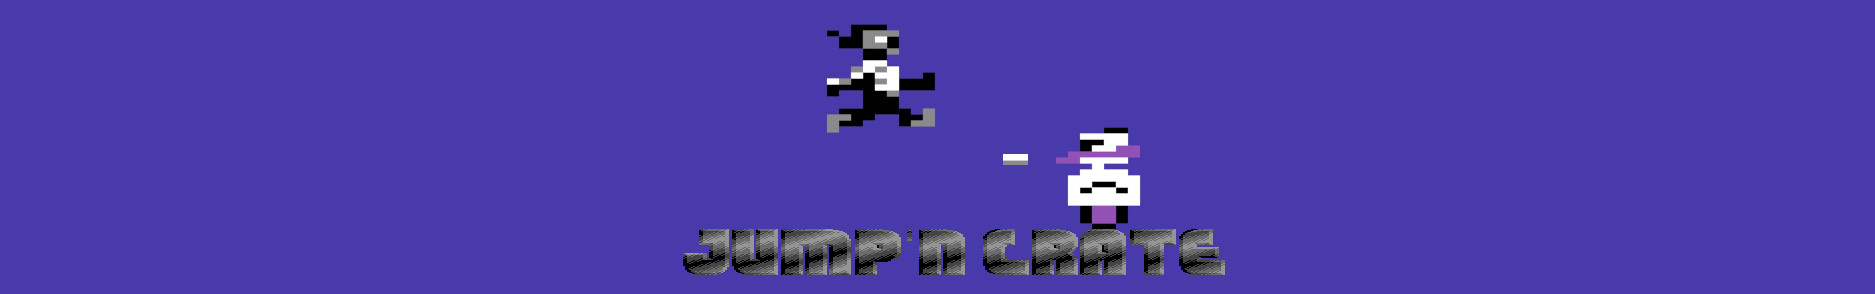 Jump'n Crate (Commodore 64, C64)